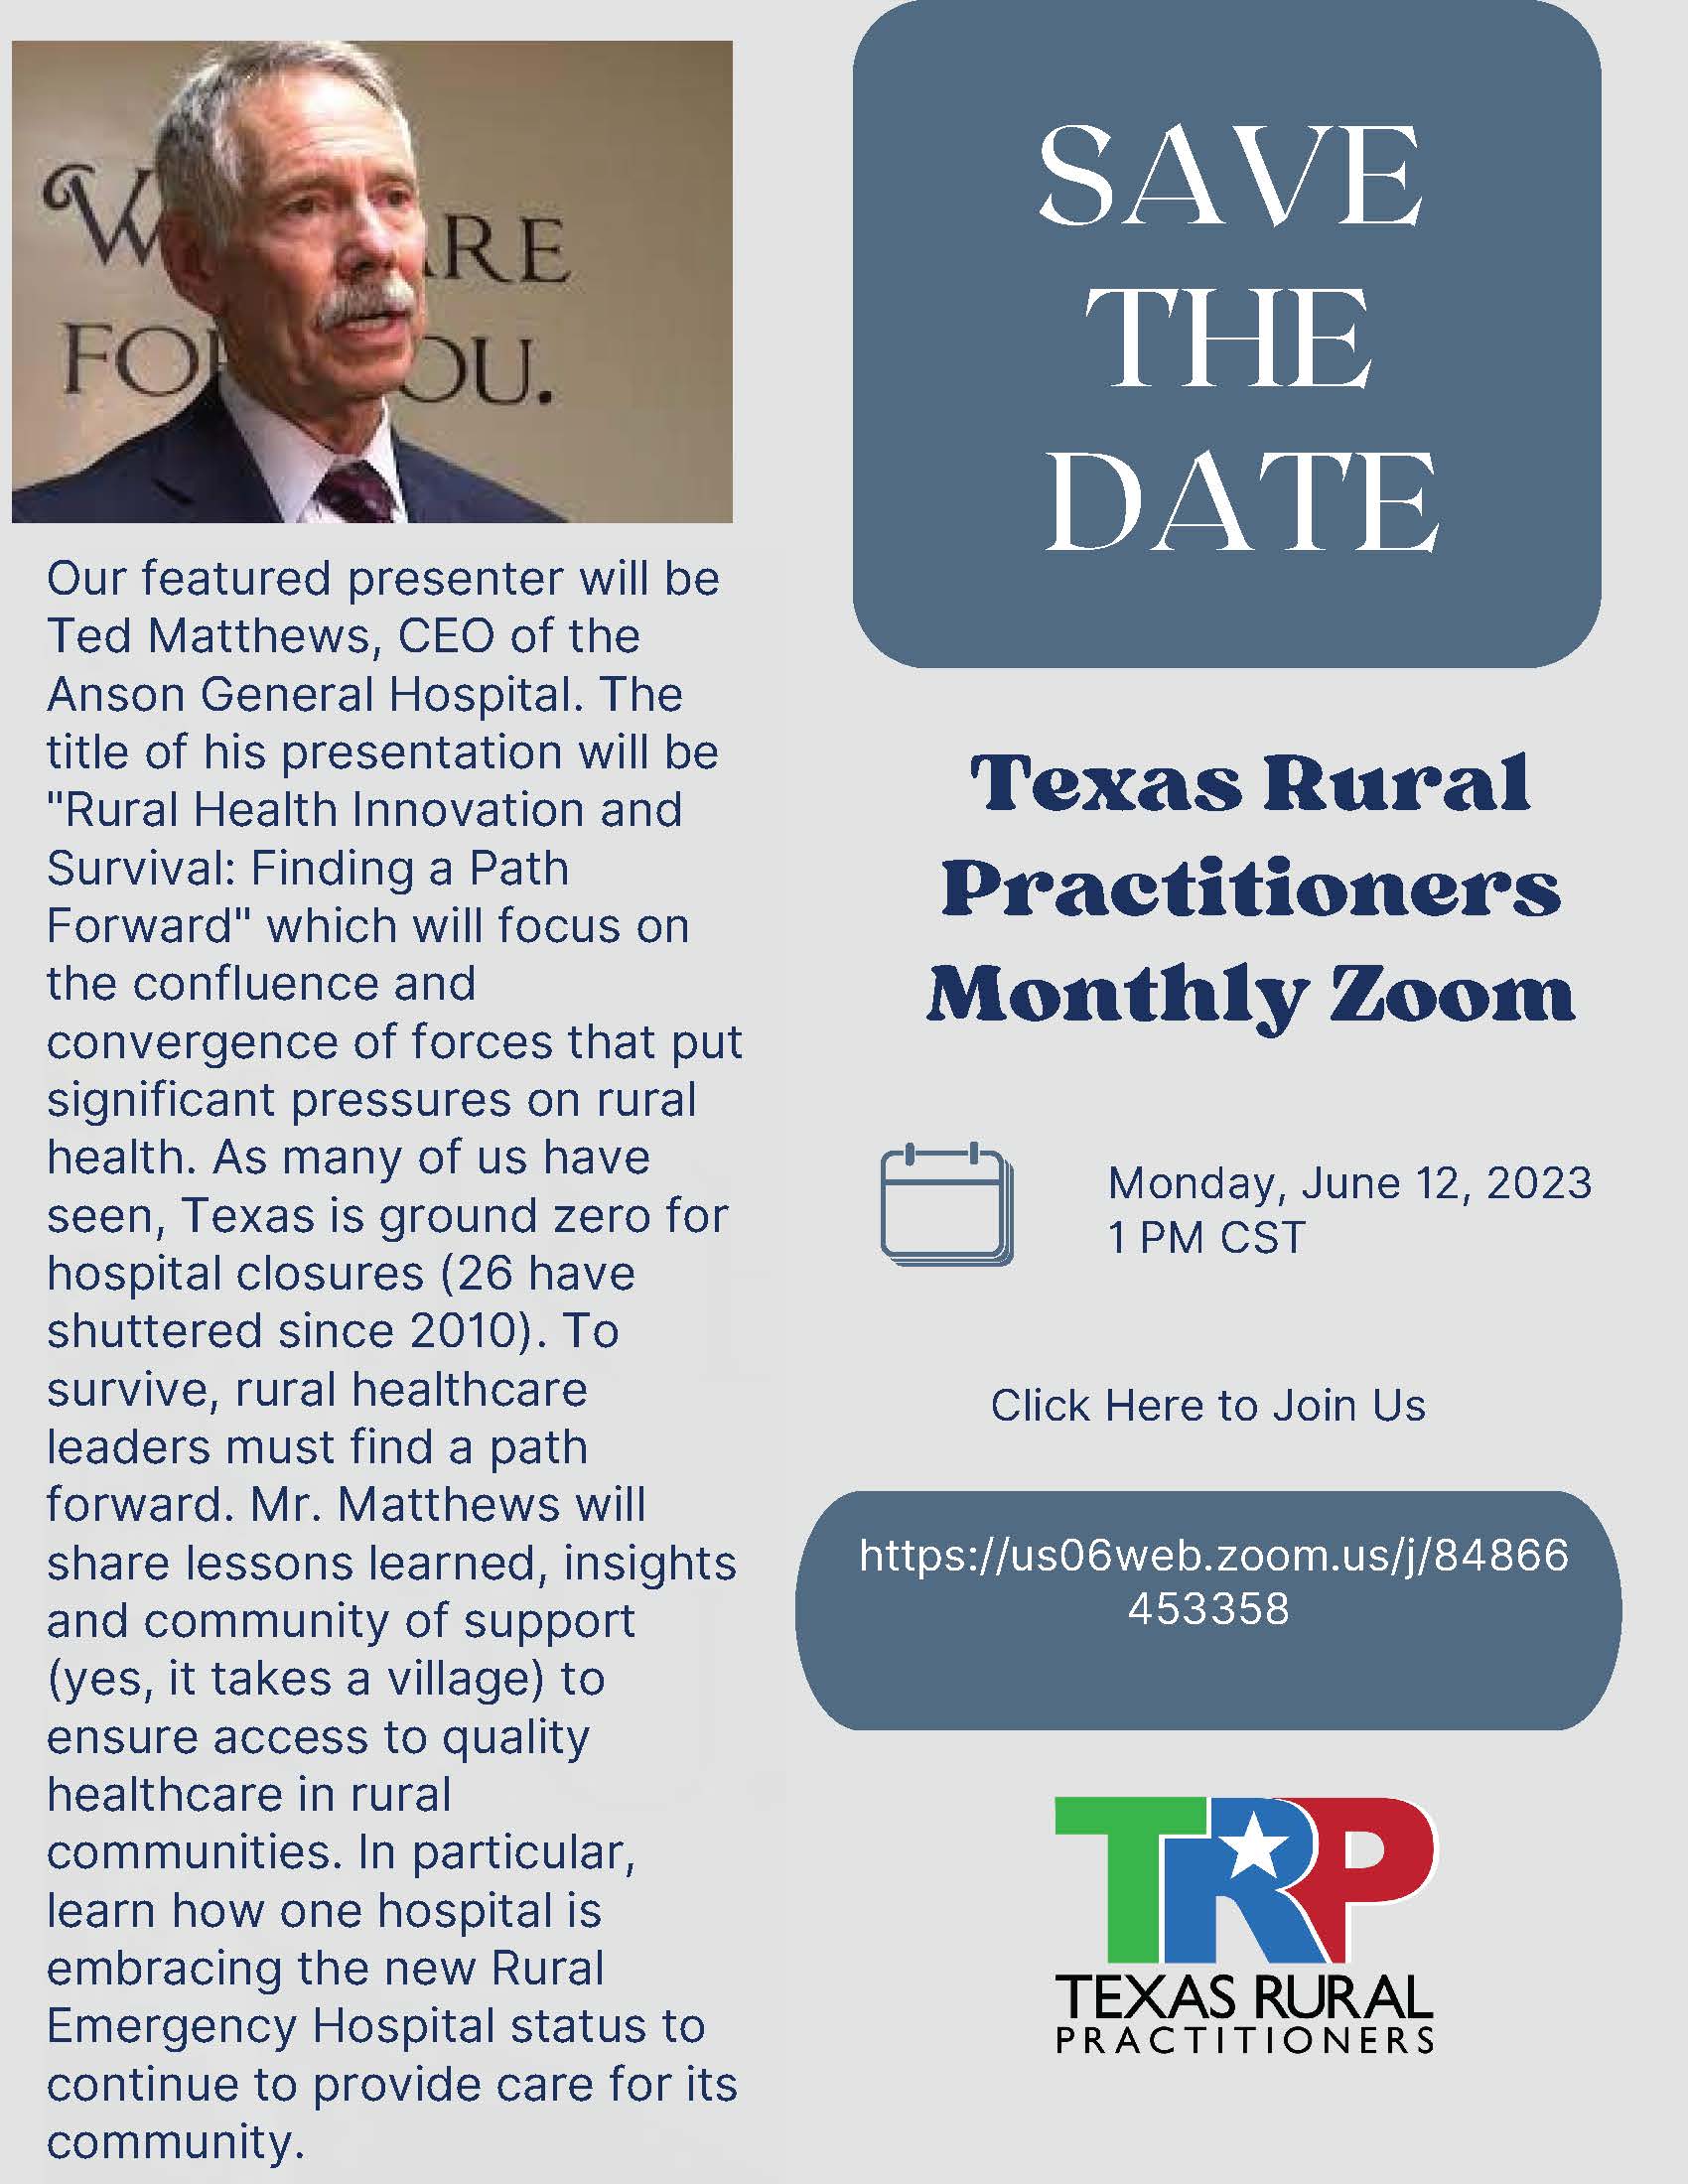 Texas Rural Practitioners Monthly Zoom Meeting